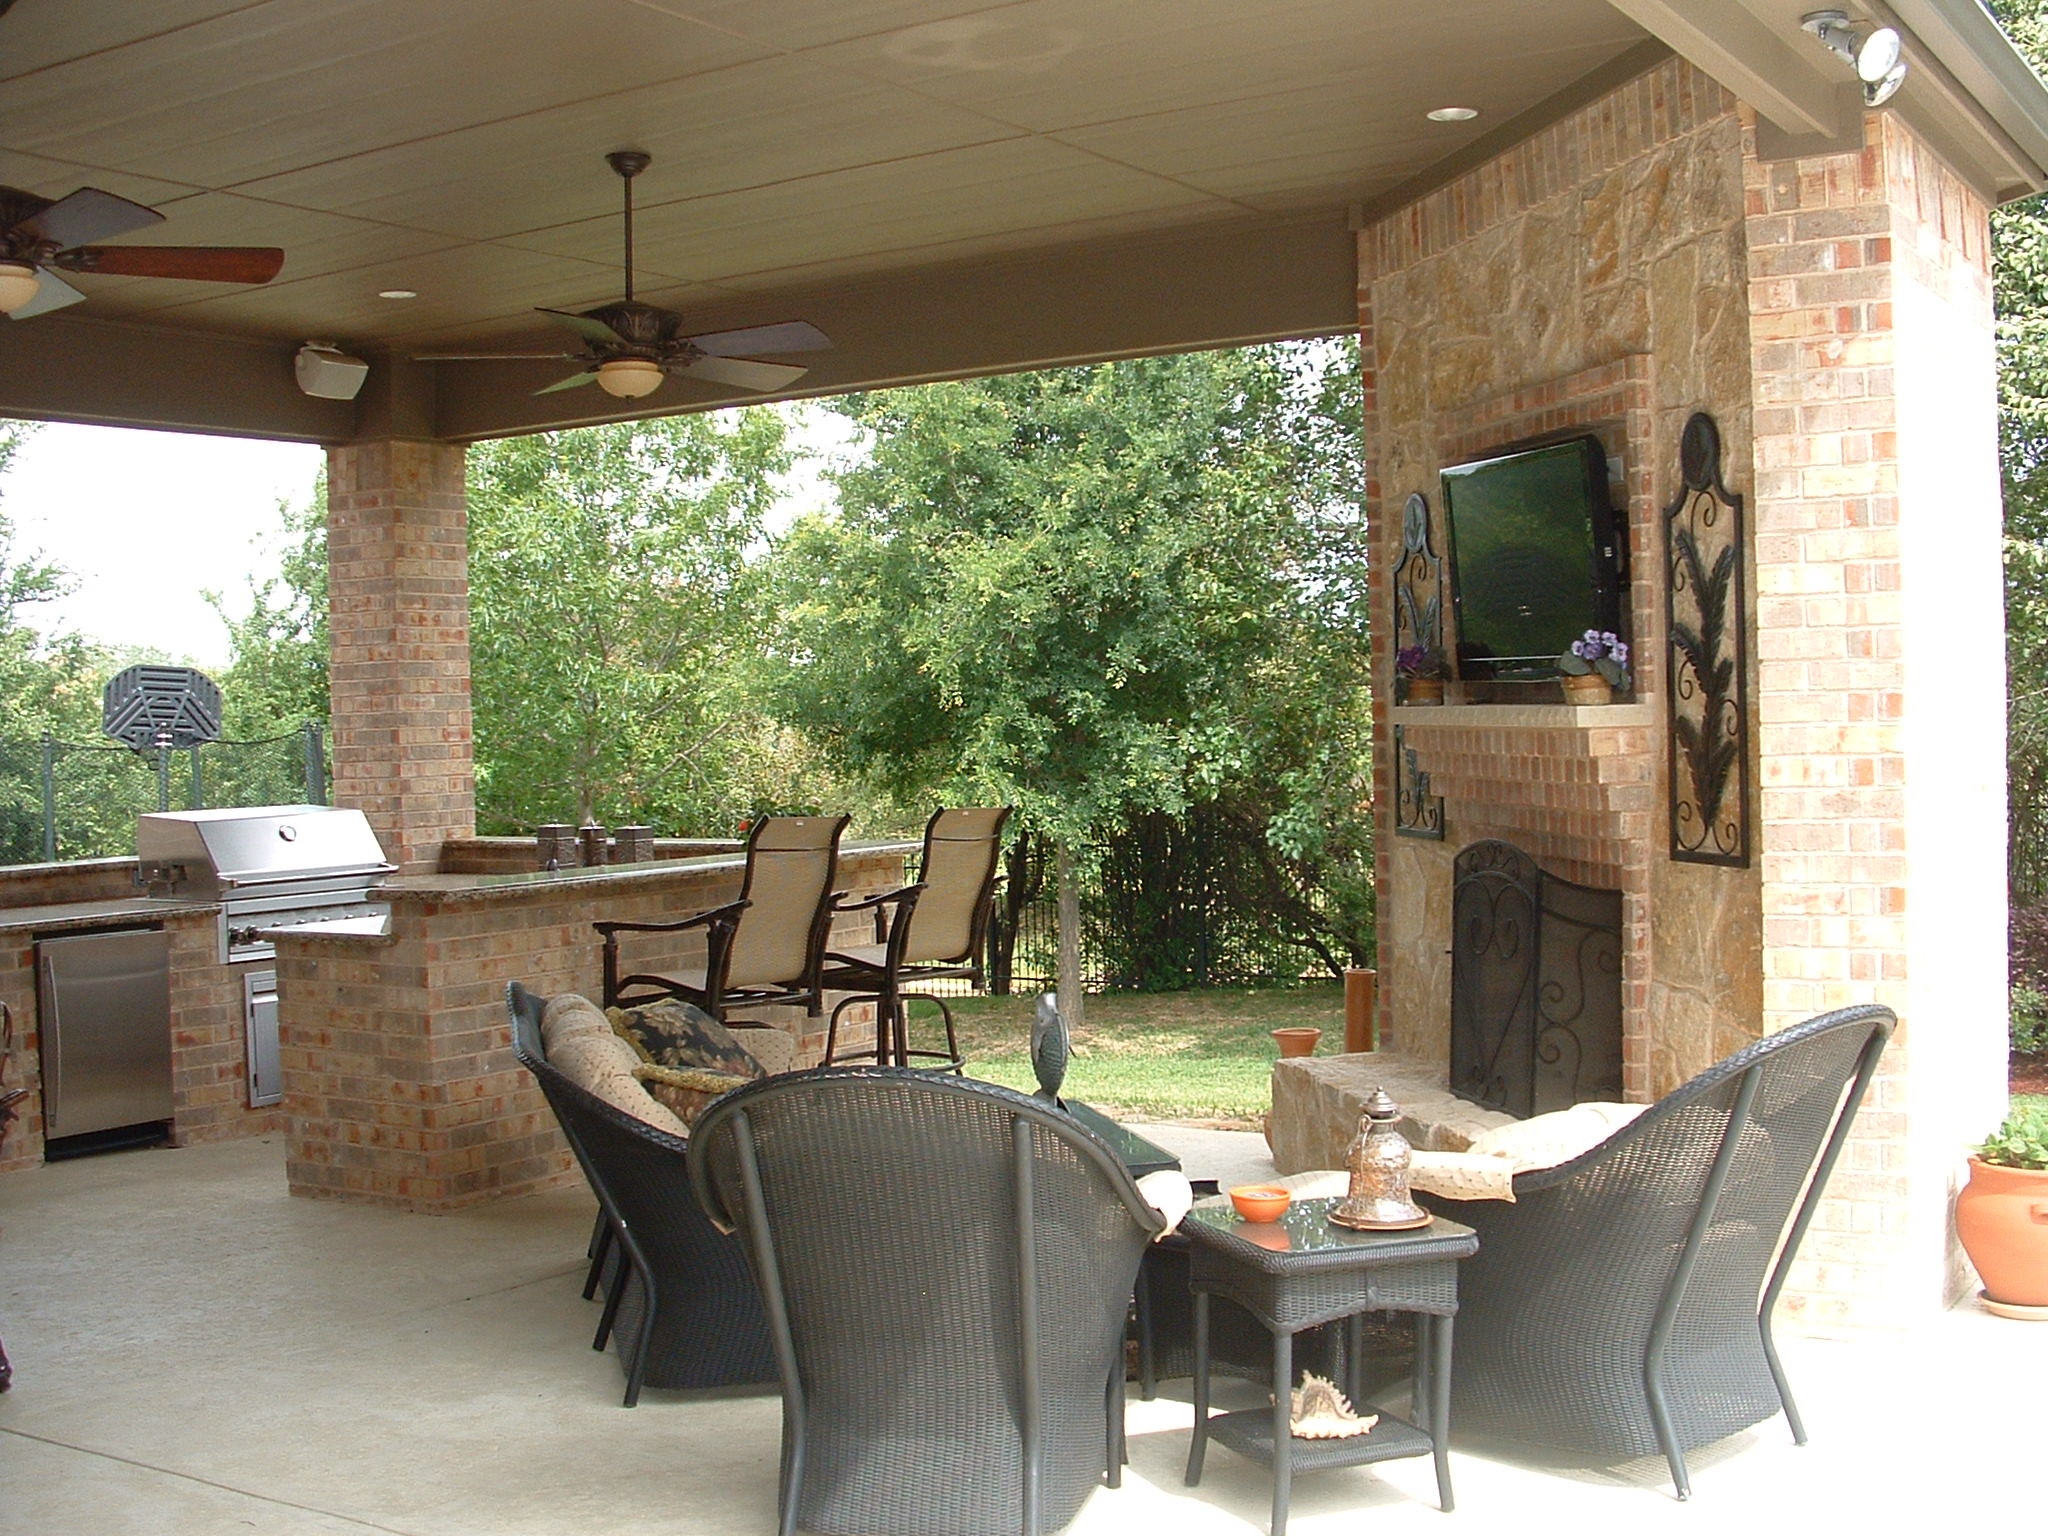 Outdoor Kitchen And Fireplace Ideas
 Outdoor Kitchen Design How to Design Outdoor Kitchen